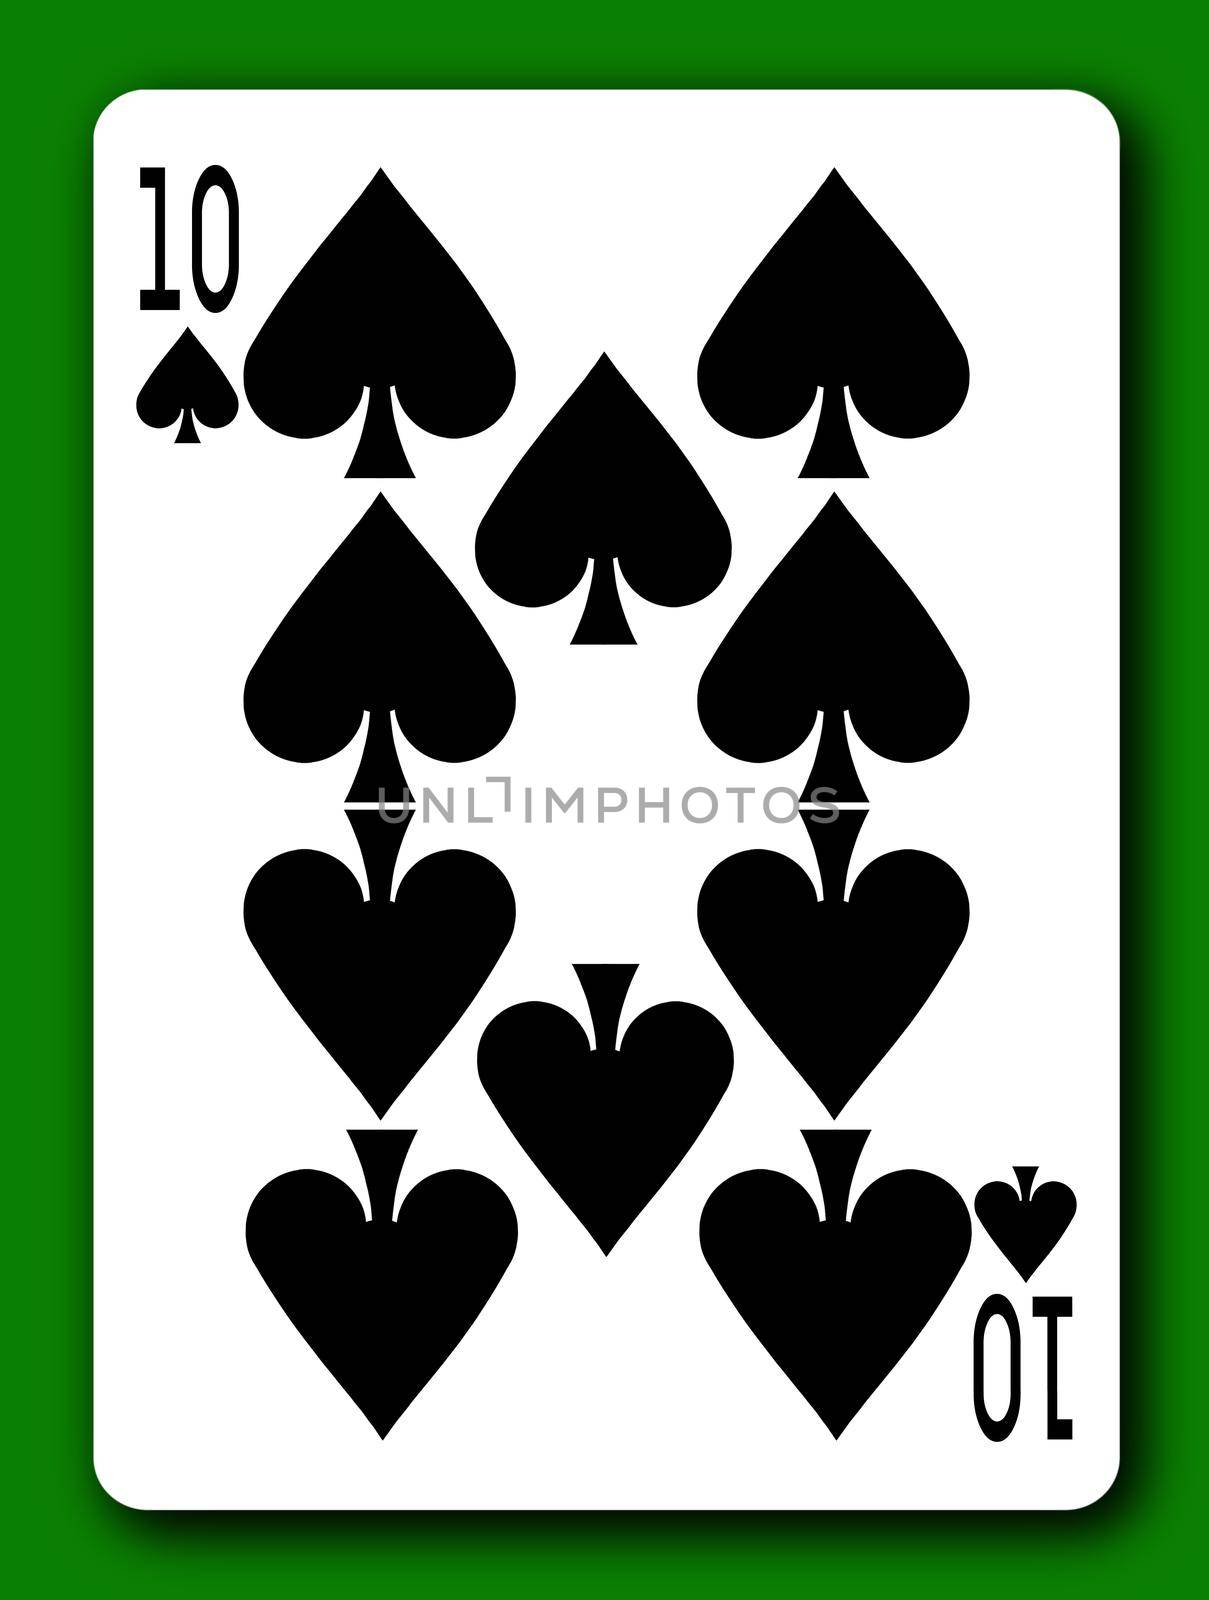 A 10 Ten of Spades playing card with clipping path to remove background and shadow